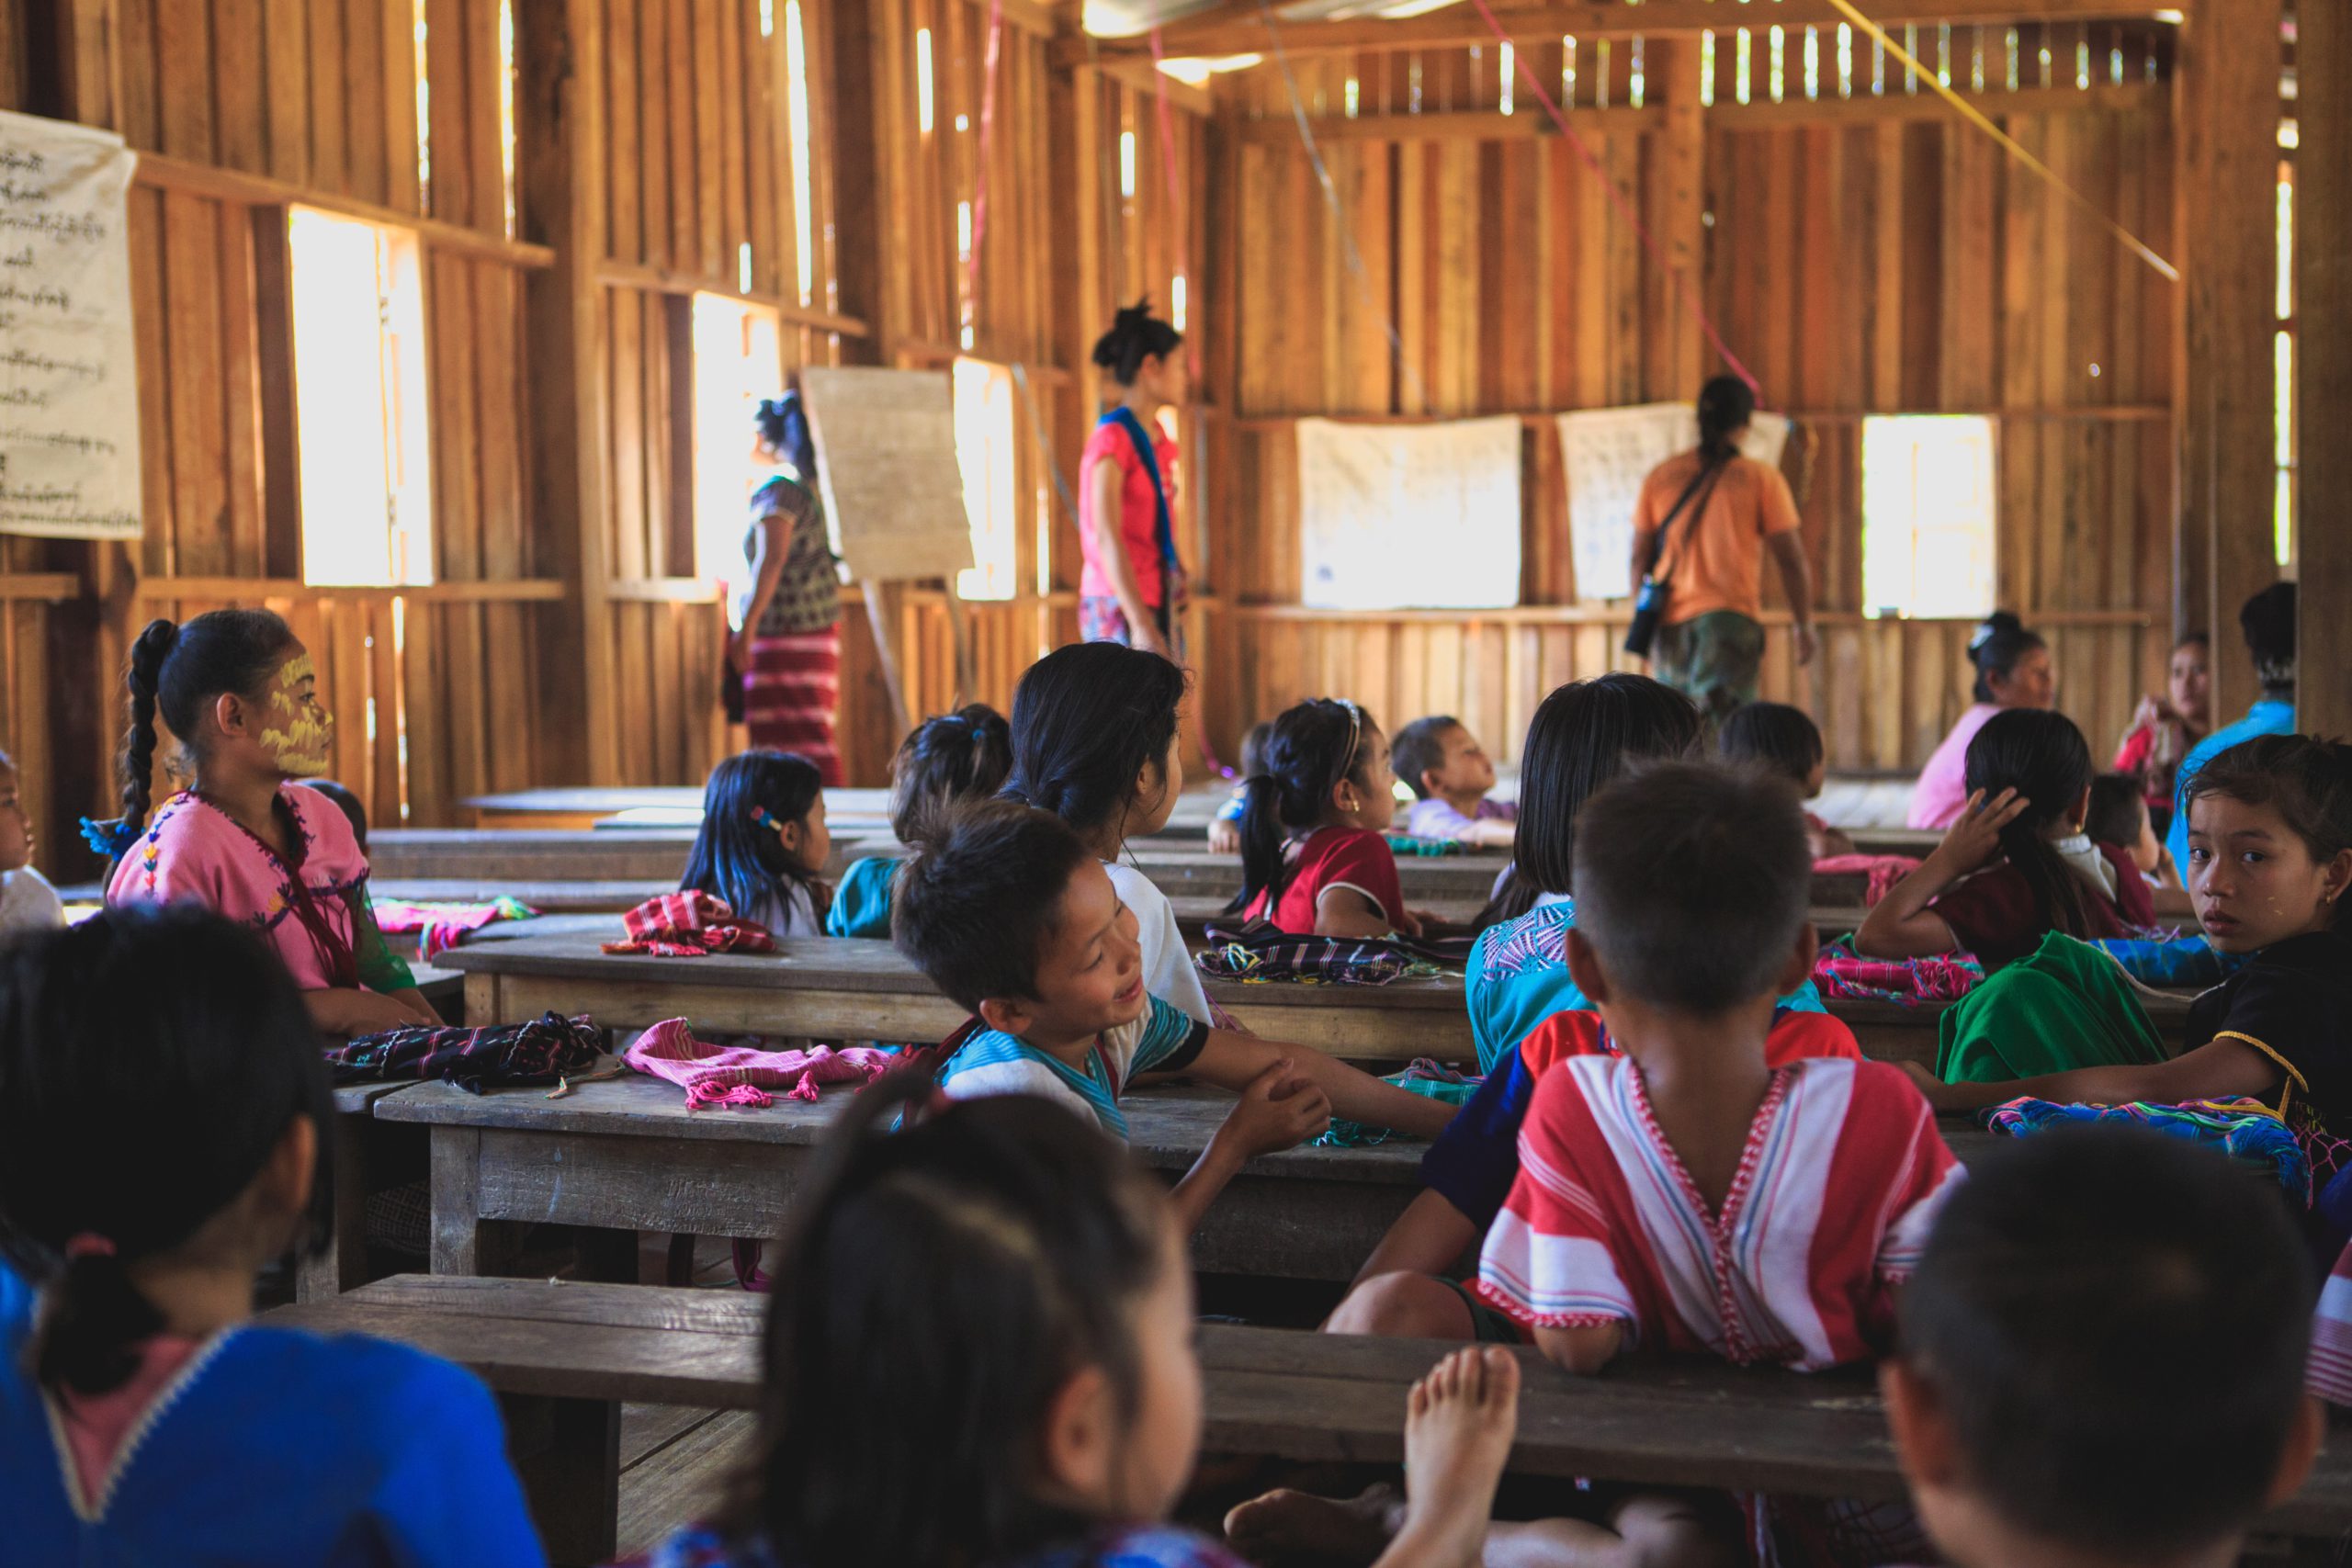 Edtech startups want to reform education in Myanmar, but systemic challenges hinder mass adoption